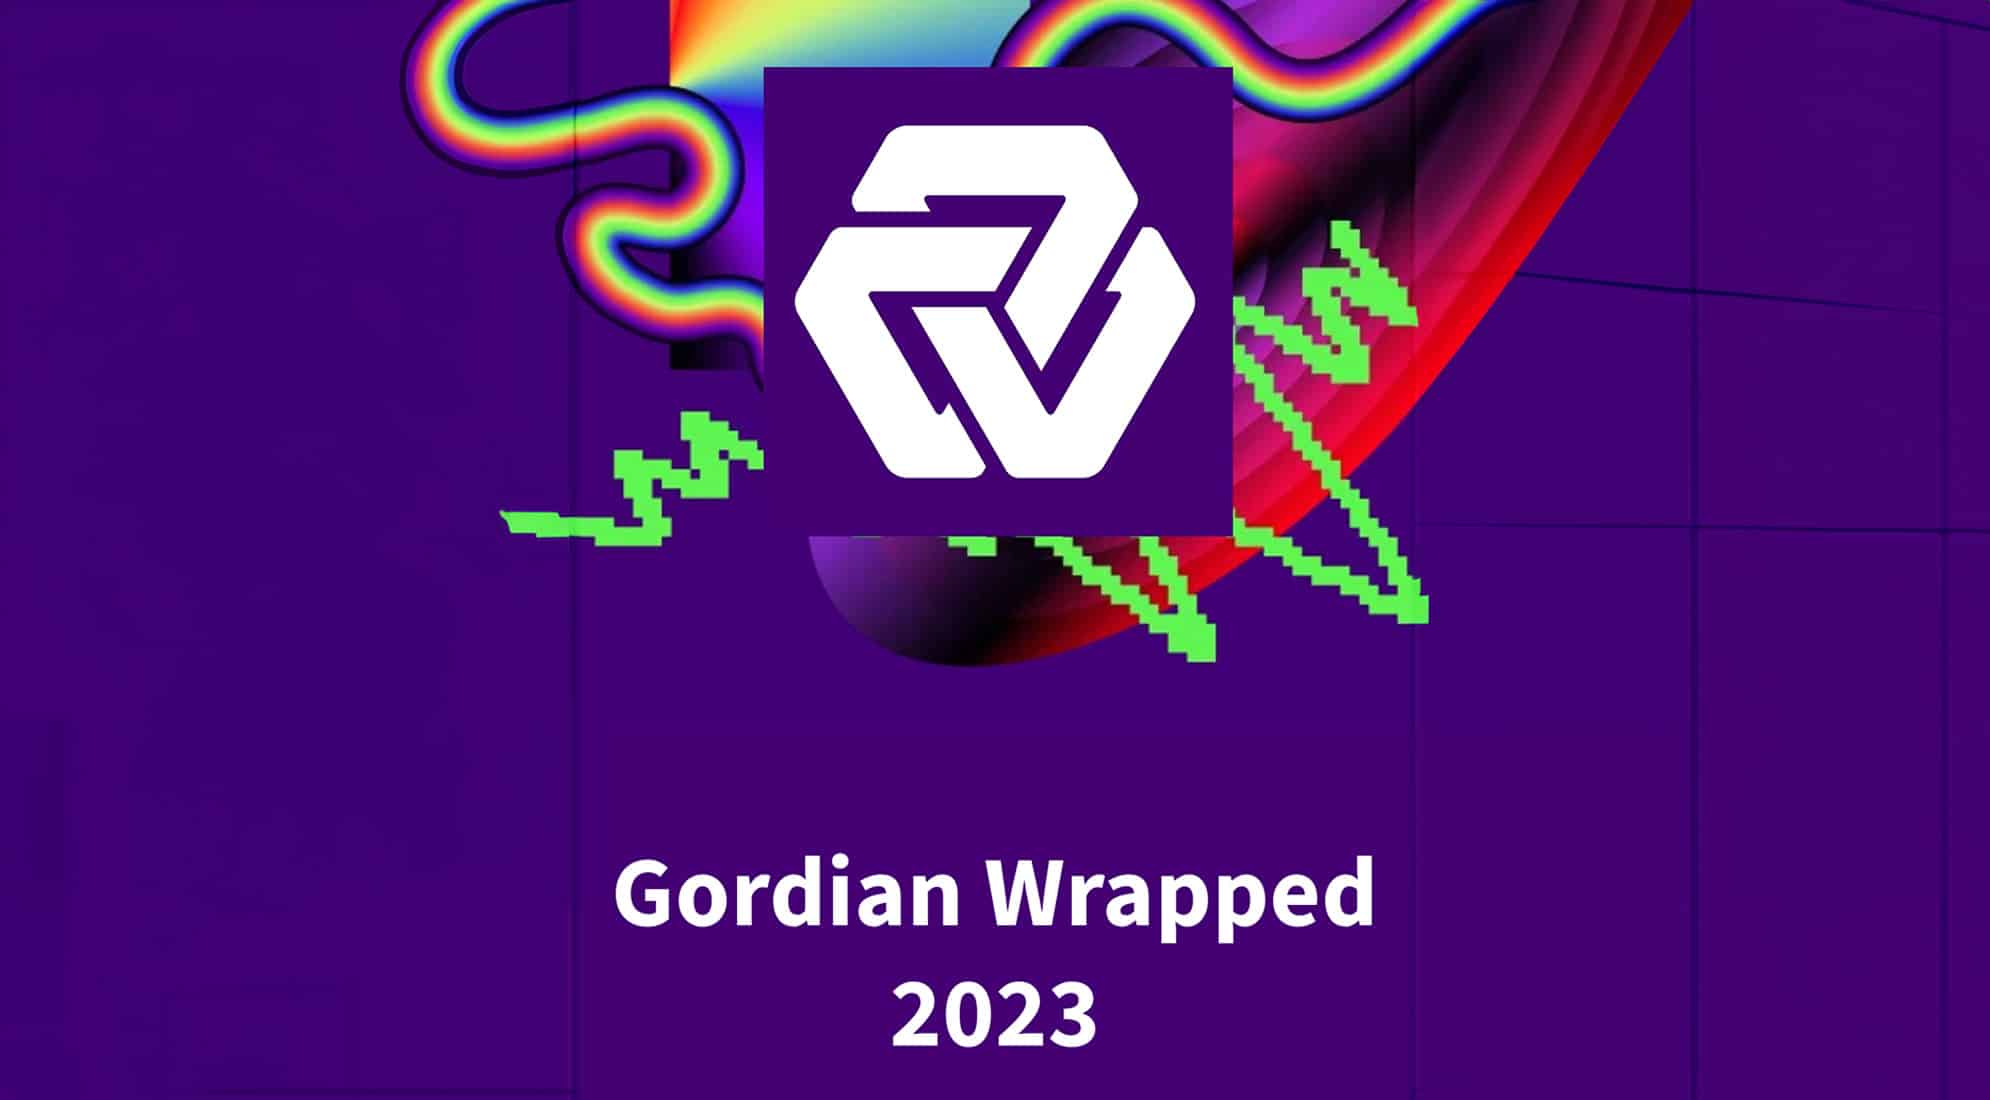 Gordian Wrapped 2023